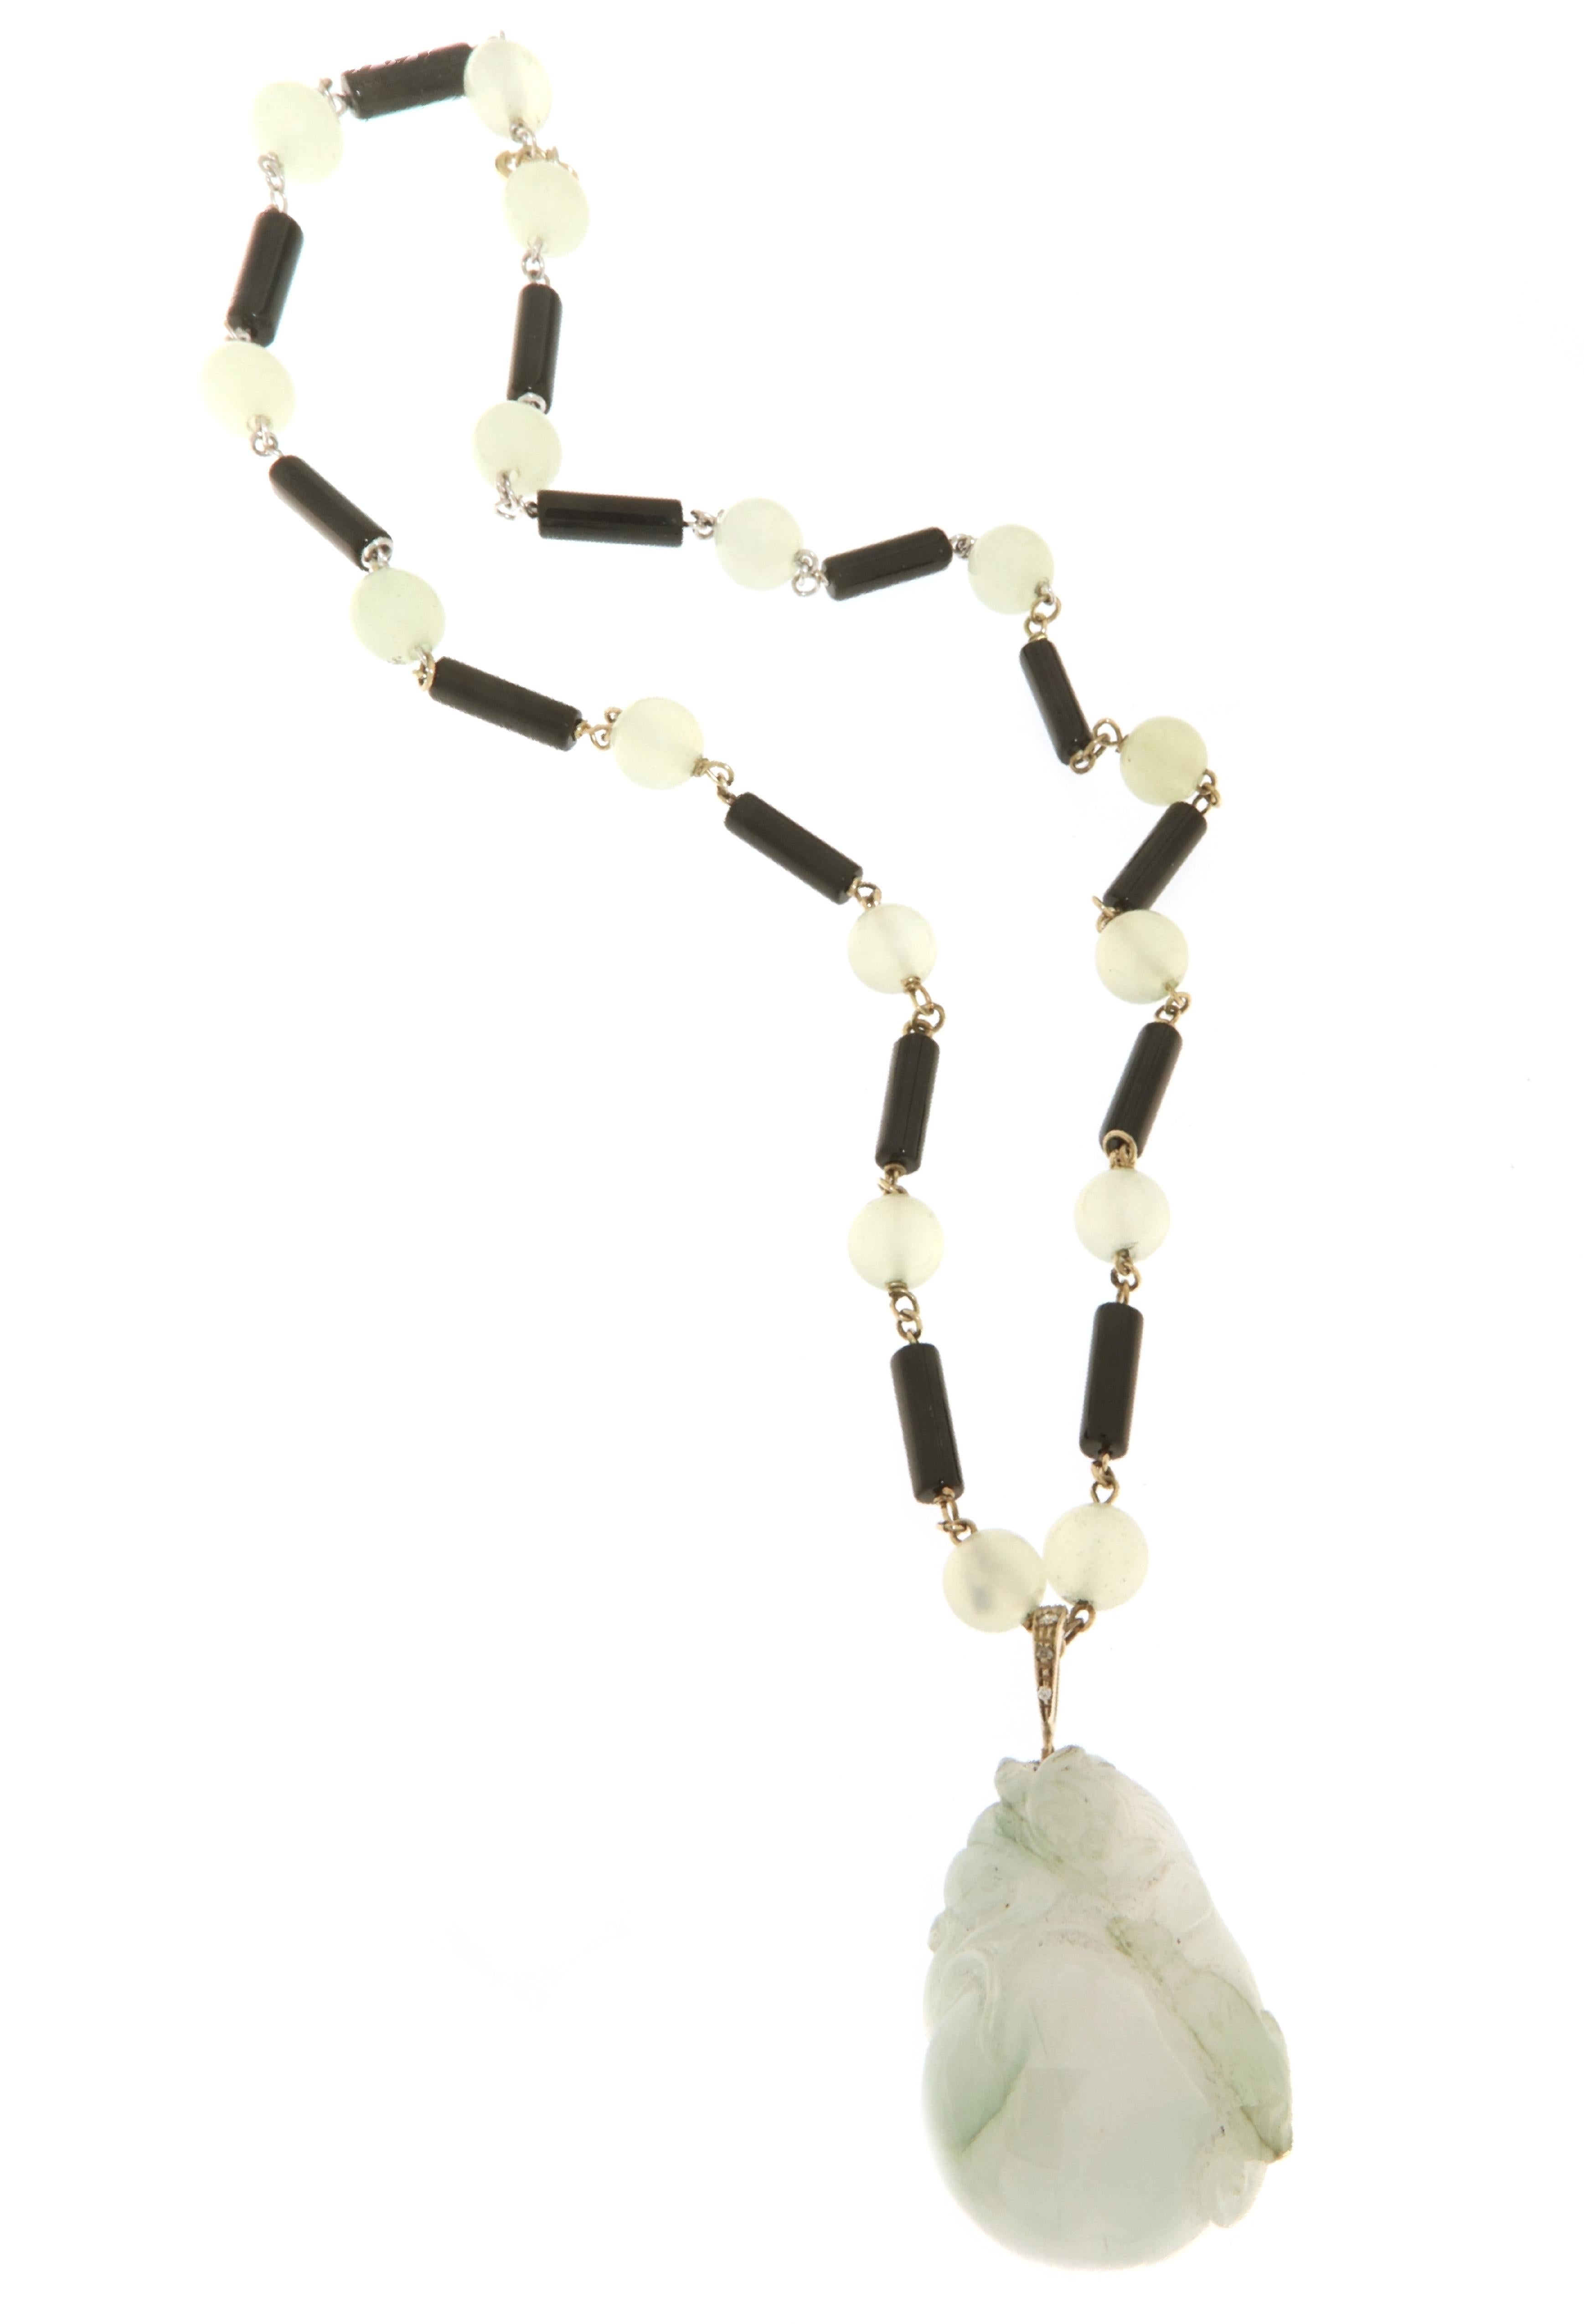 Handcrafted necklace made of 14 Karat yellow gold, mounted with jade spheres and onyx barrels that alternate with each other and support an engraved jade pendant.

Jade is the symbol of Chinese dynasties, it is a stone that has calming, reassuring